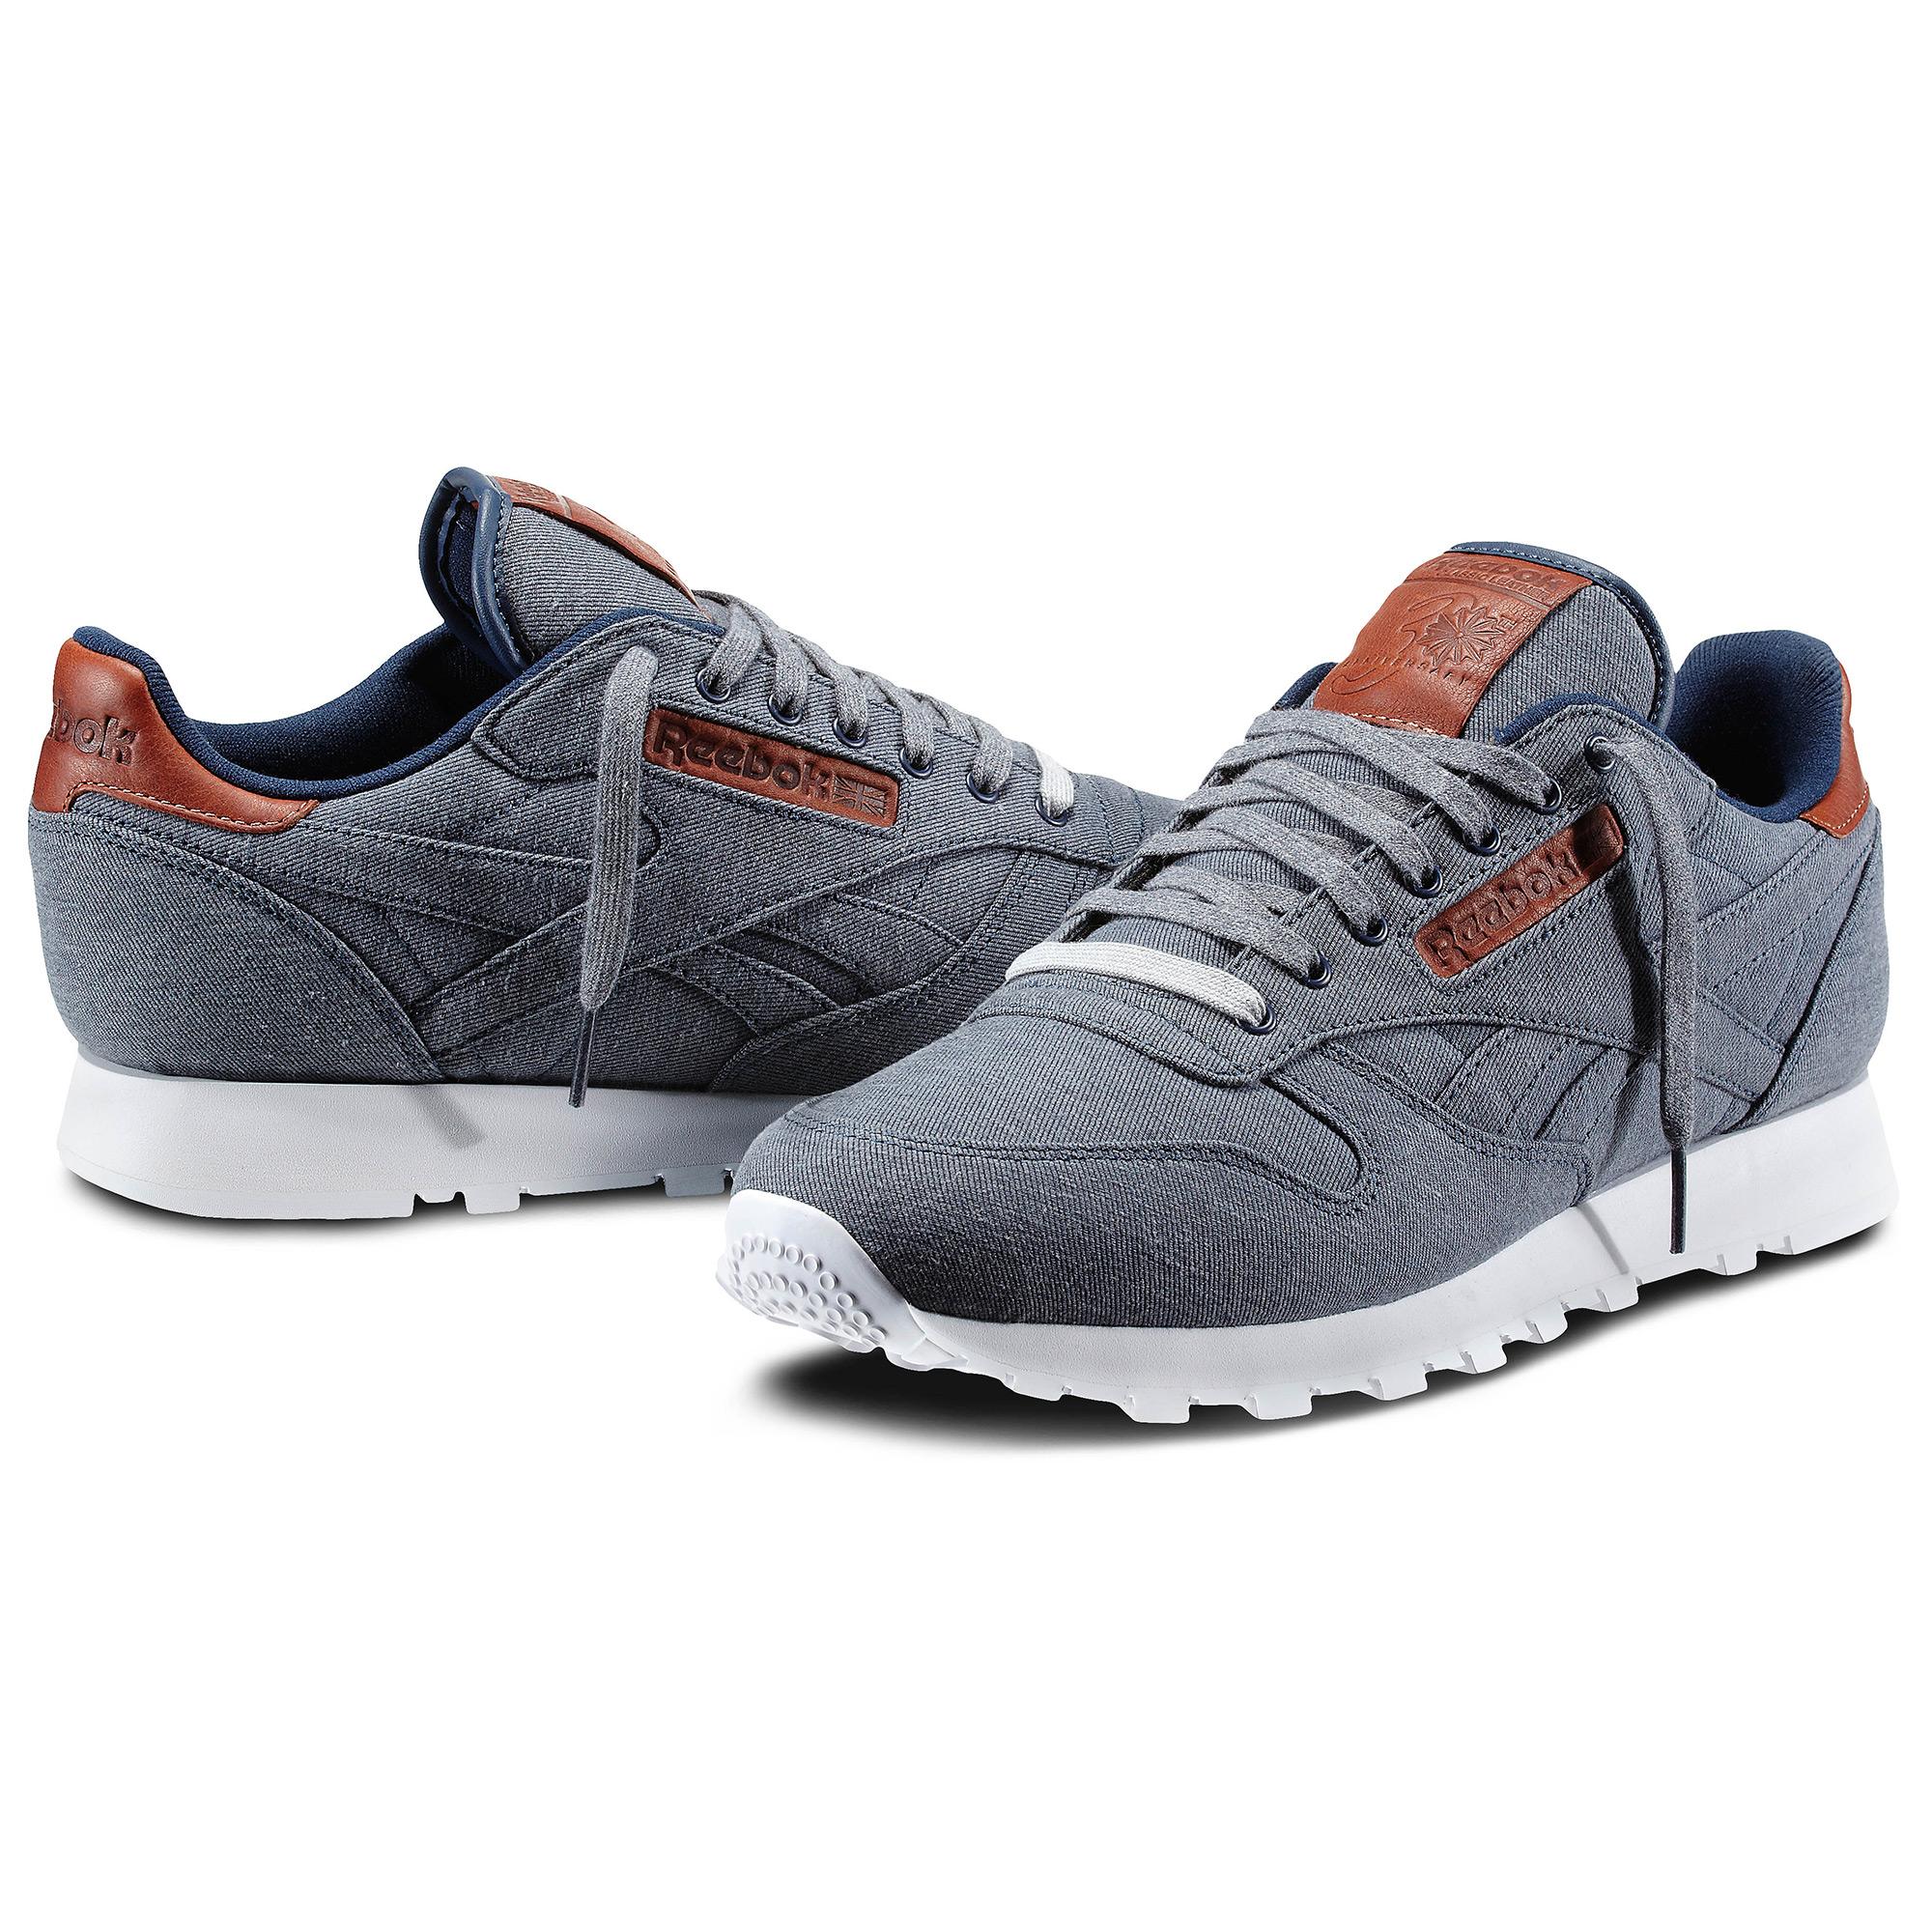 Foto Reebok Classic Leather Salvaged Hombre